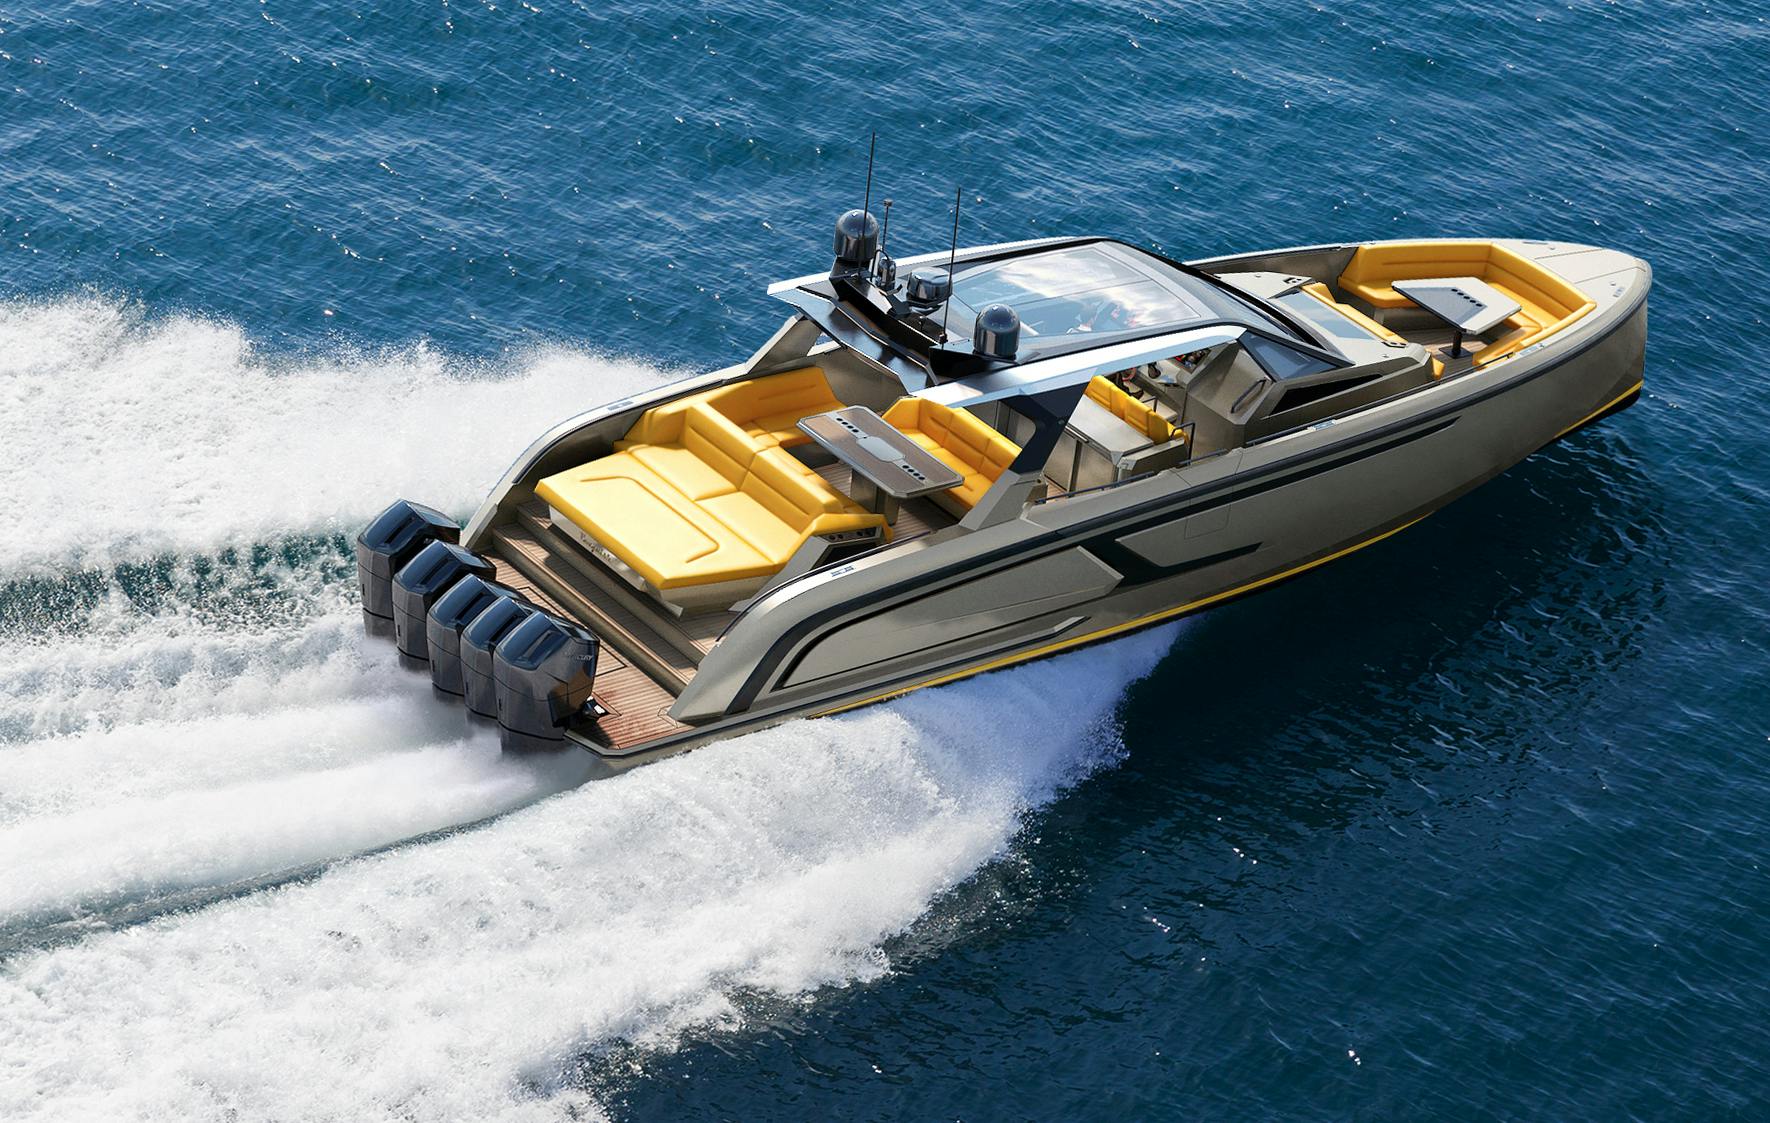 Vanquish Yachts - VQ - GRP - Composite - Mercury - Outboard - Fast - yellow